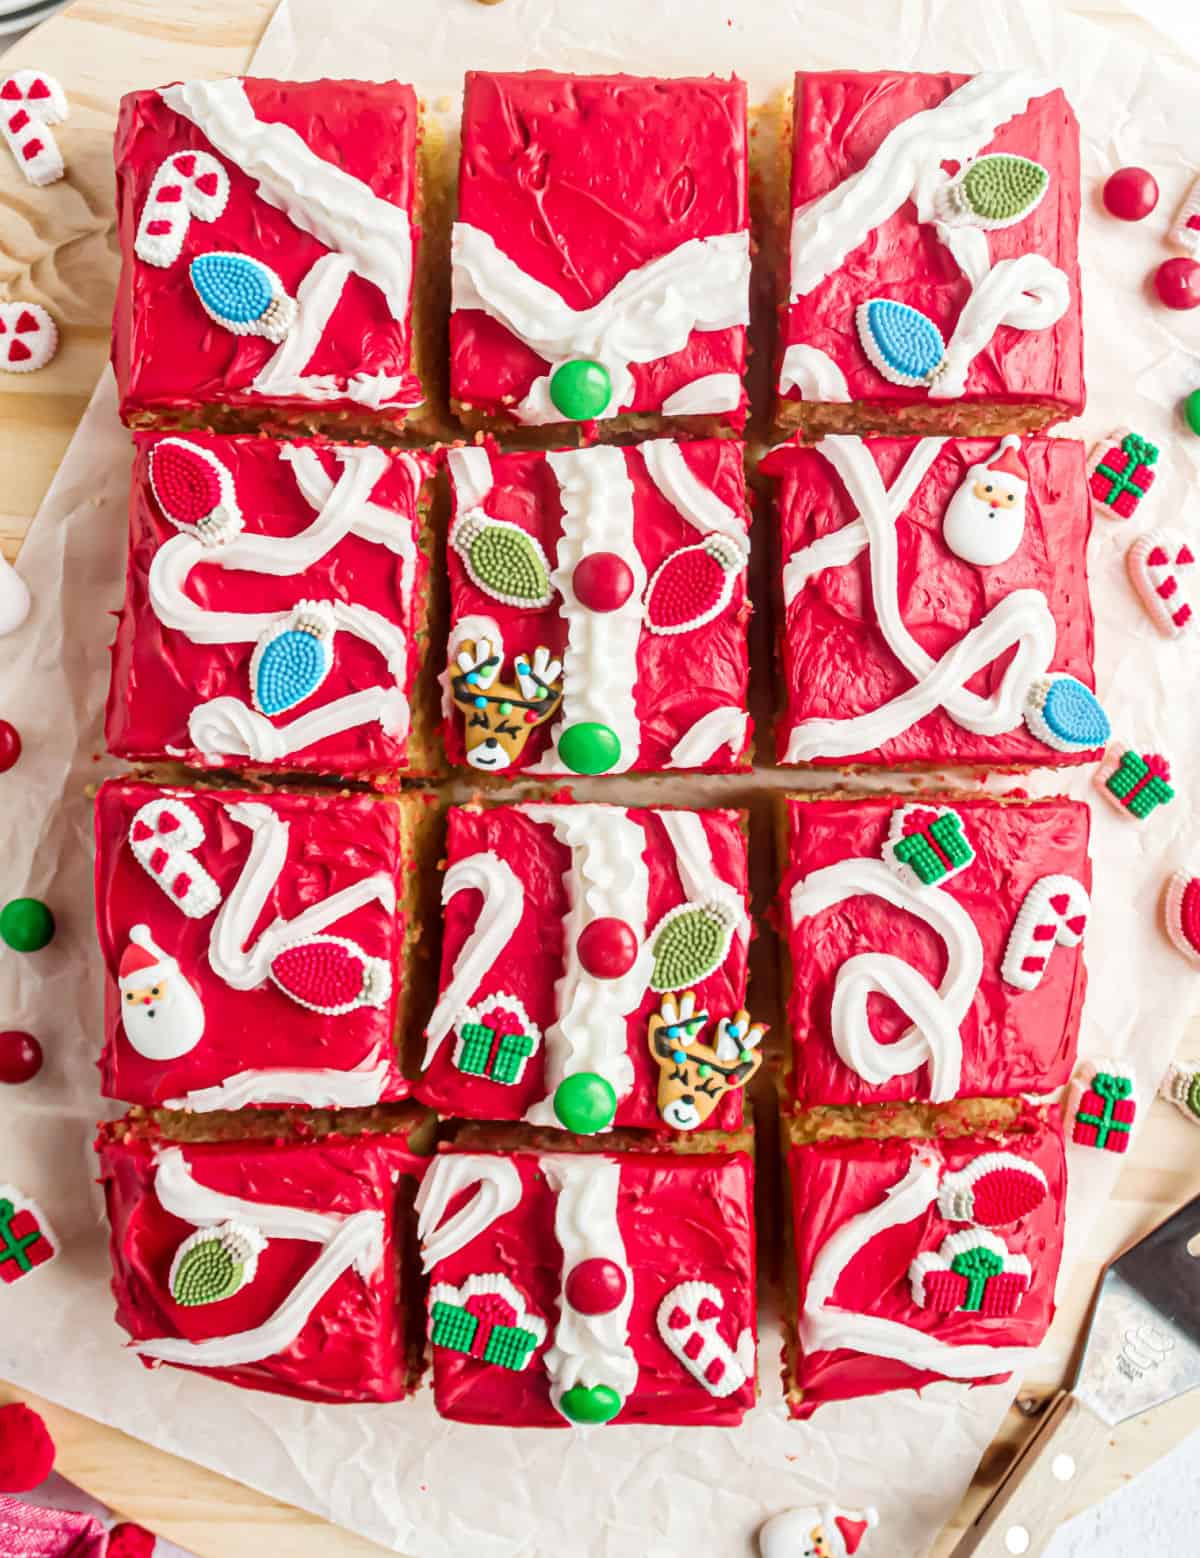 Ugly sweater cake cut into squares.